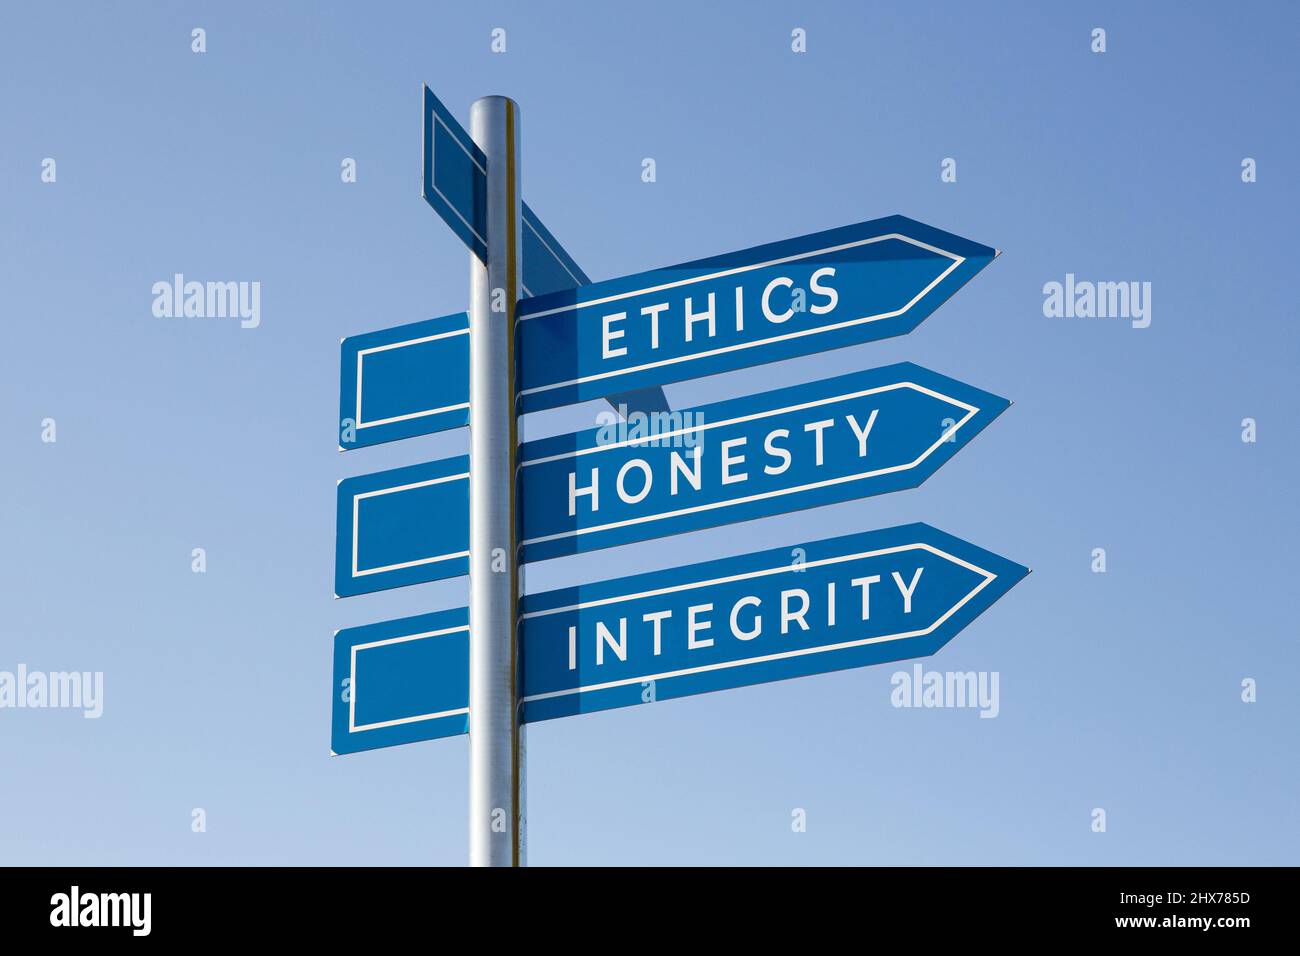 Ethics honesty integrity words on signpost isolated on sky background Stock Photo